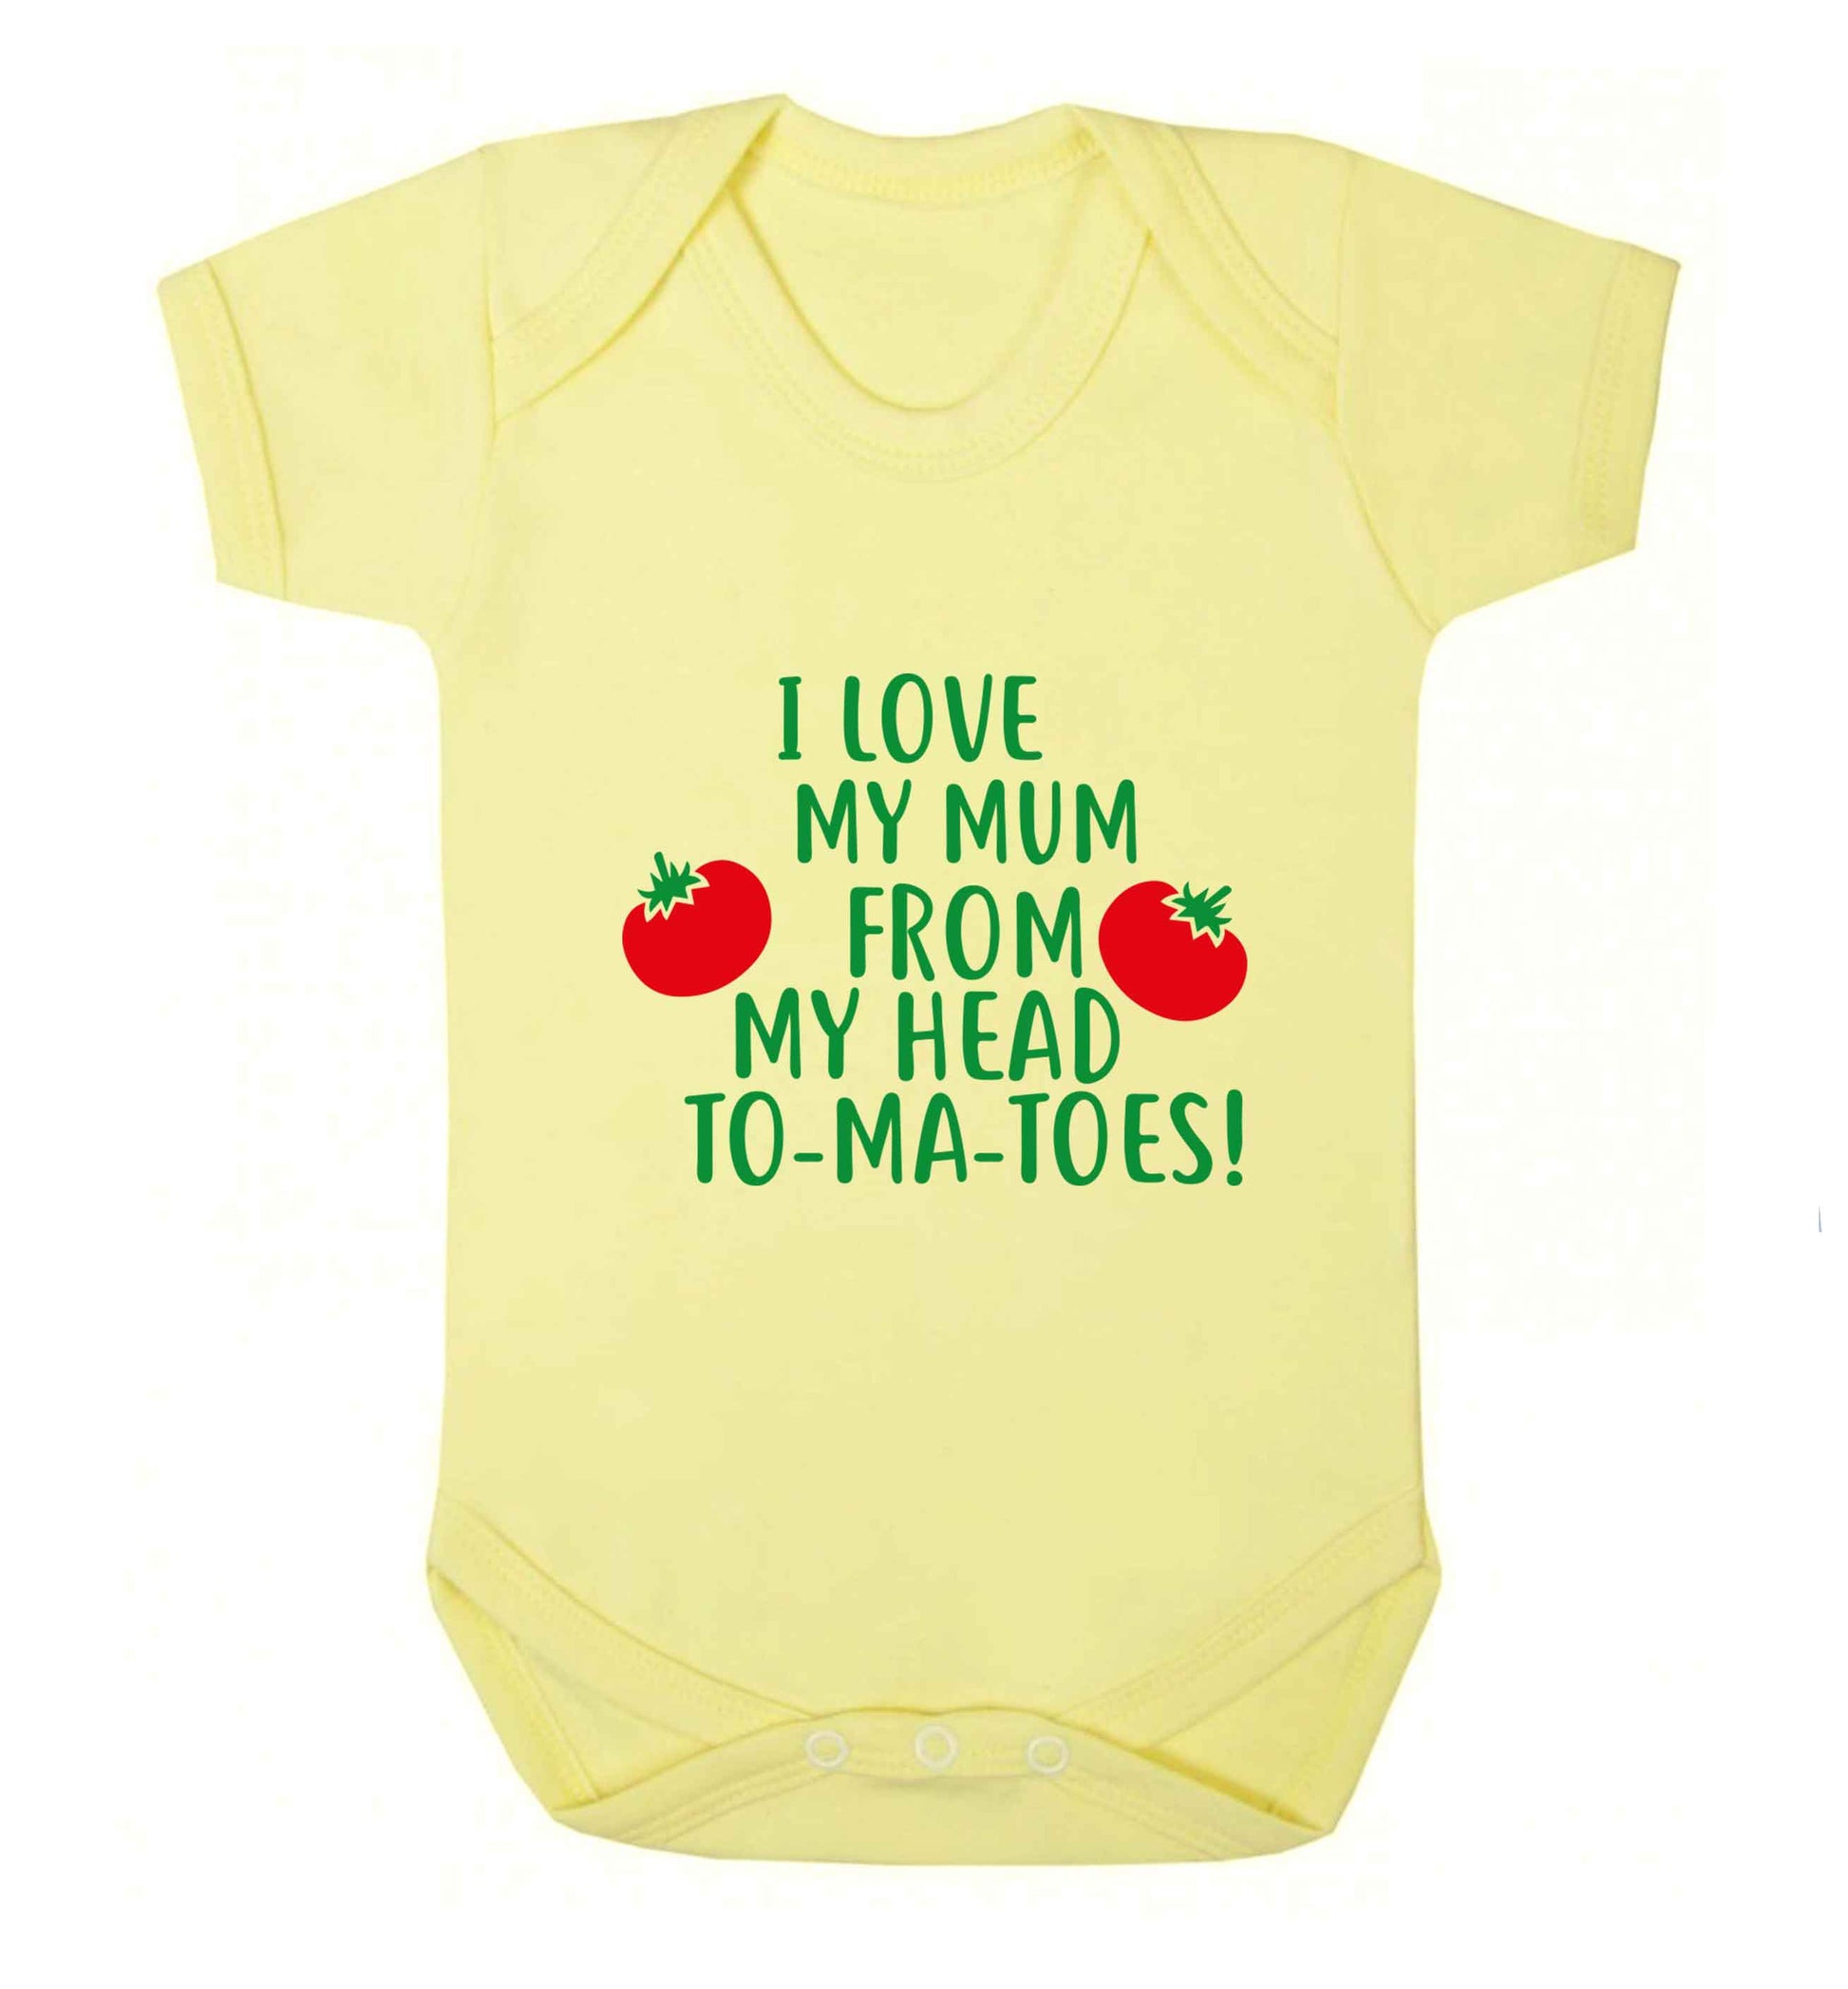 I love my mum from my head to-my-toes! baby vest pale yellow 18-24 months